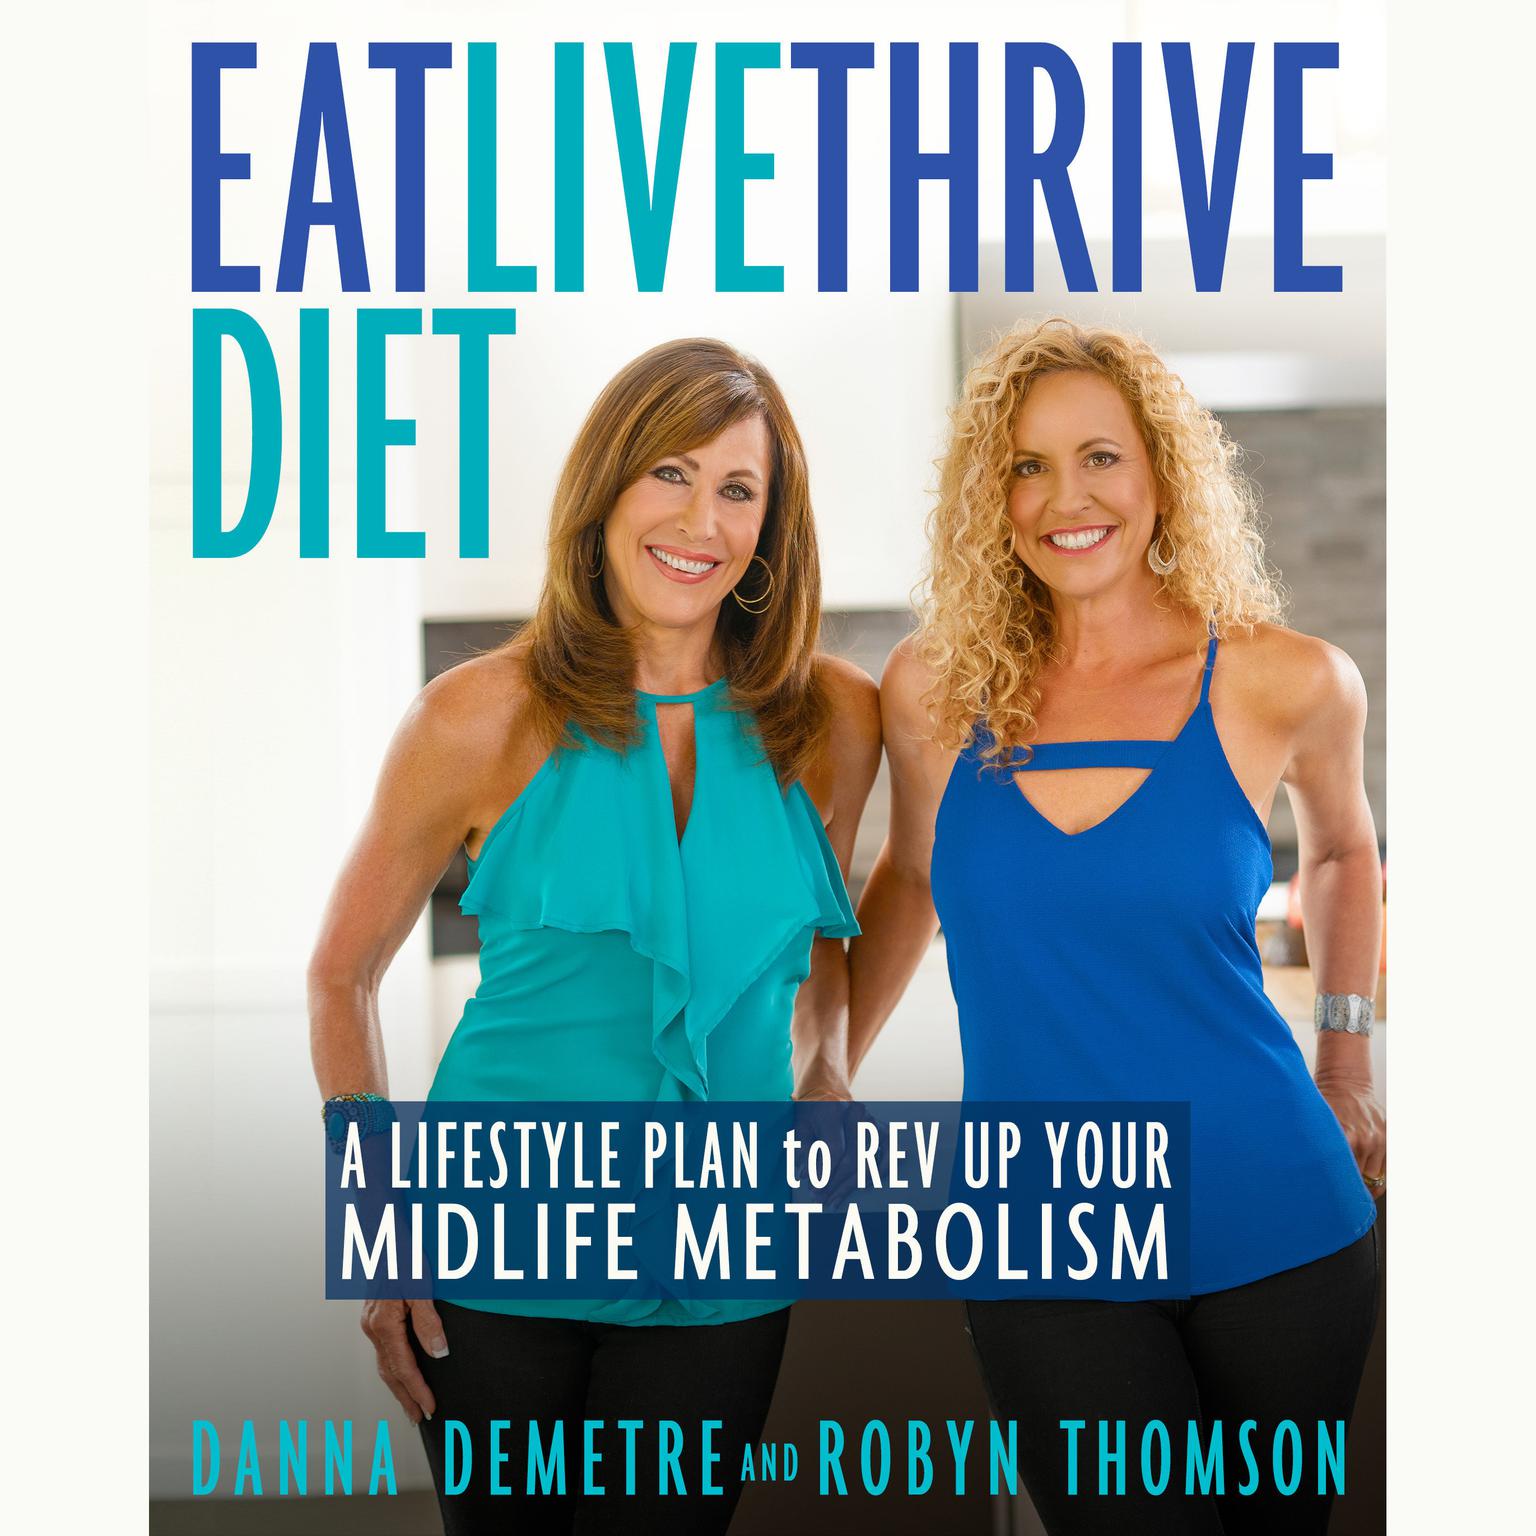 Eat, Live, Thrive Diet: A Lifestyle Plan to Rev Up Your Midlife Metabolism Audiobook, by Danna Demetre